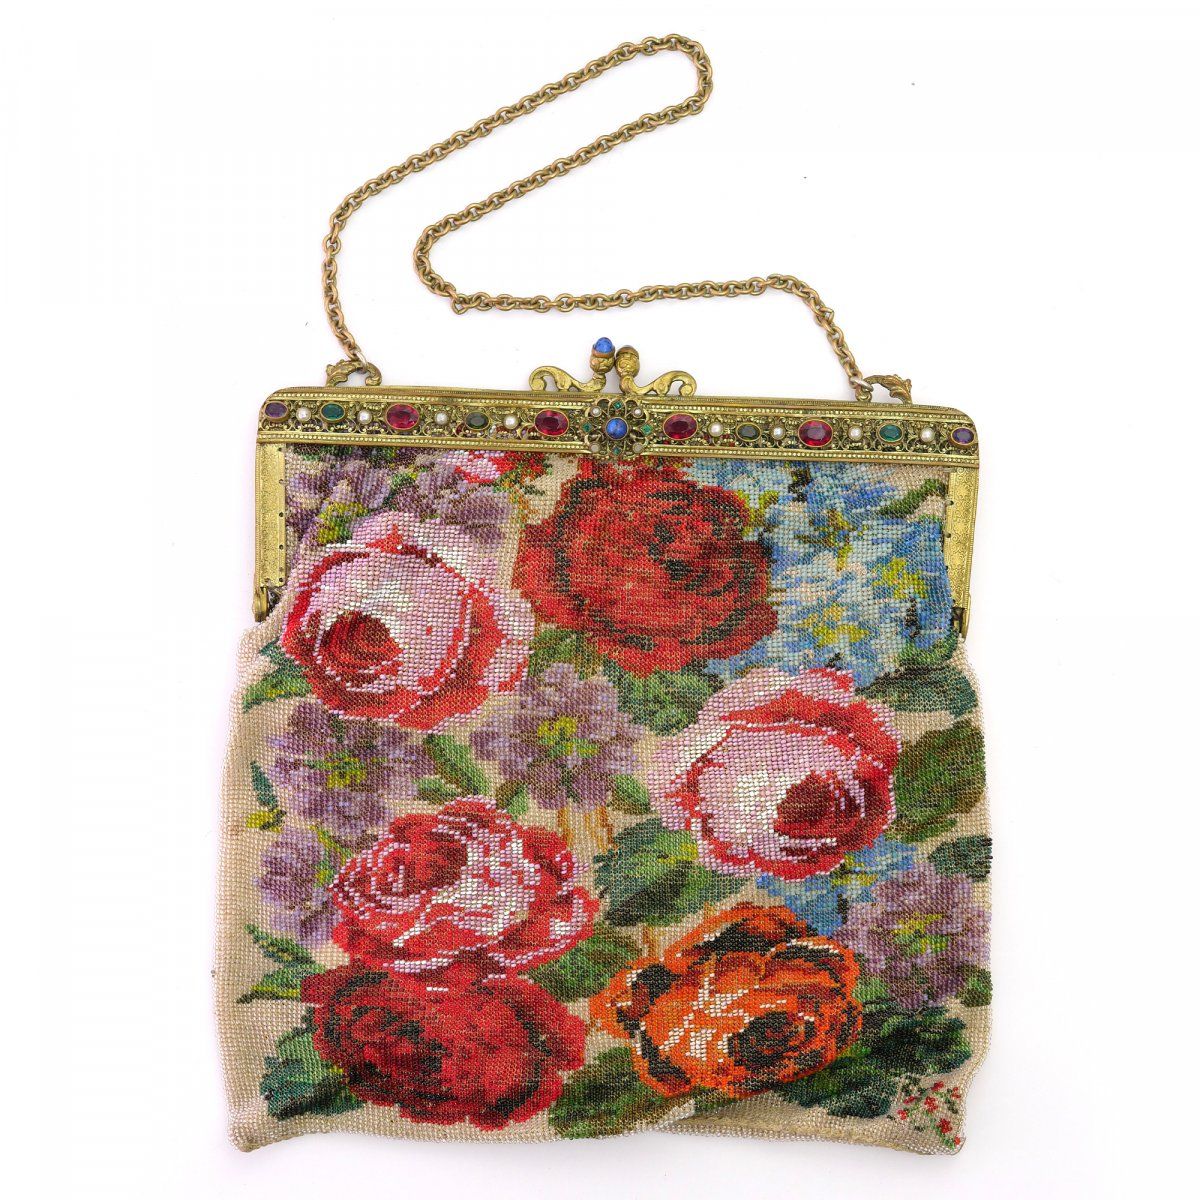 Null Bag with floral motif, c. 1900, H. 22 x 20 cm. Knitted polychrome beads, te&hellip;